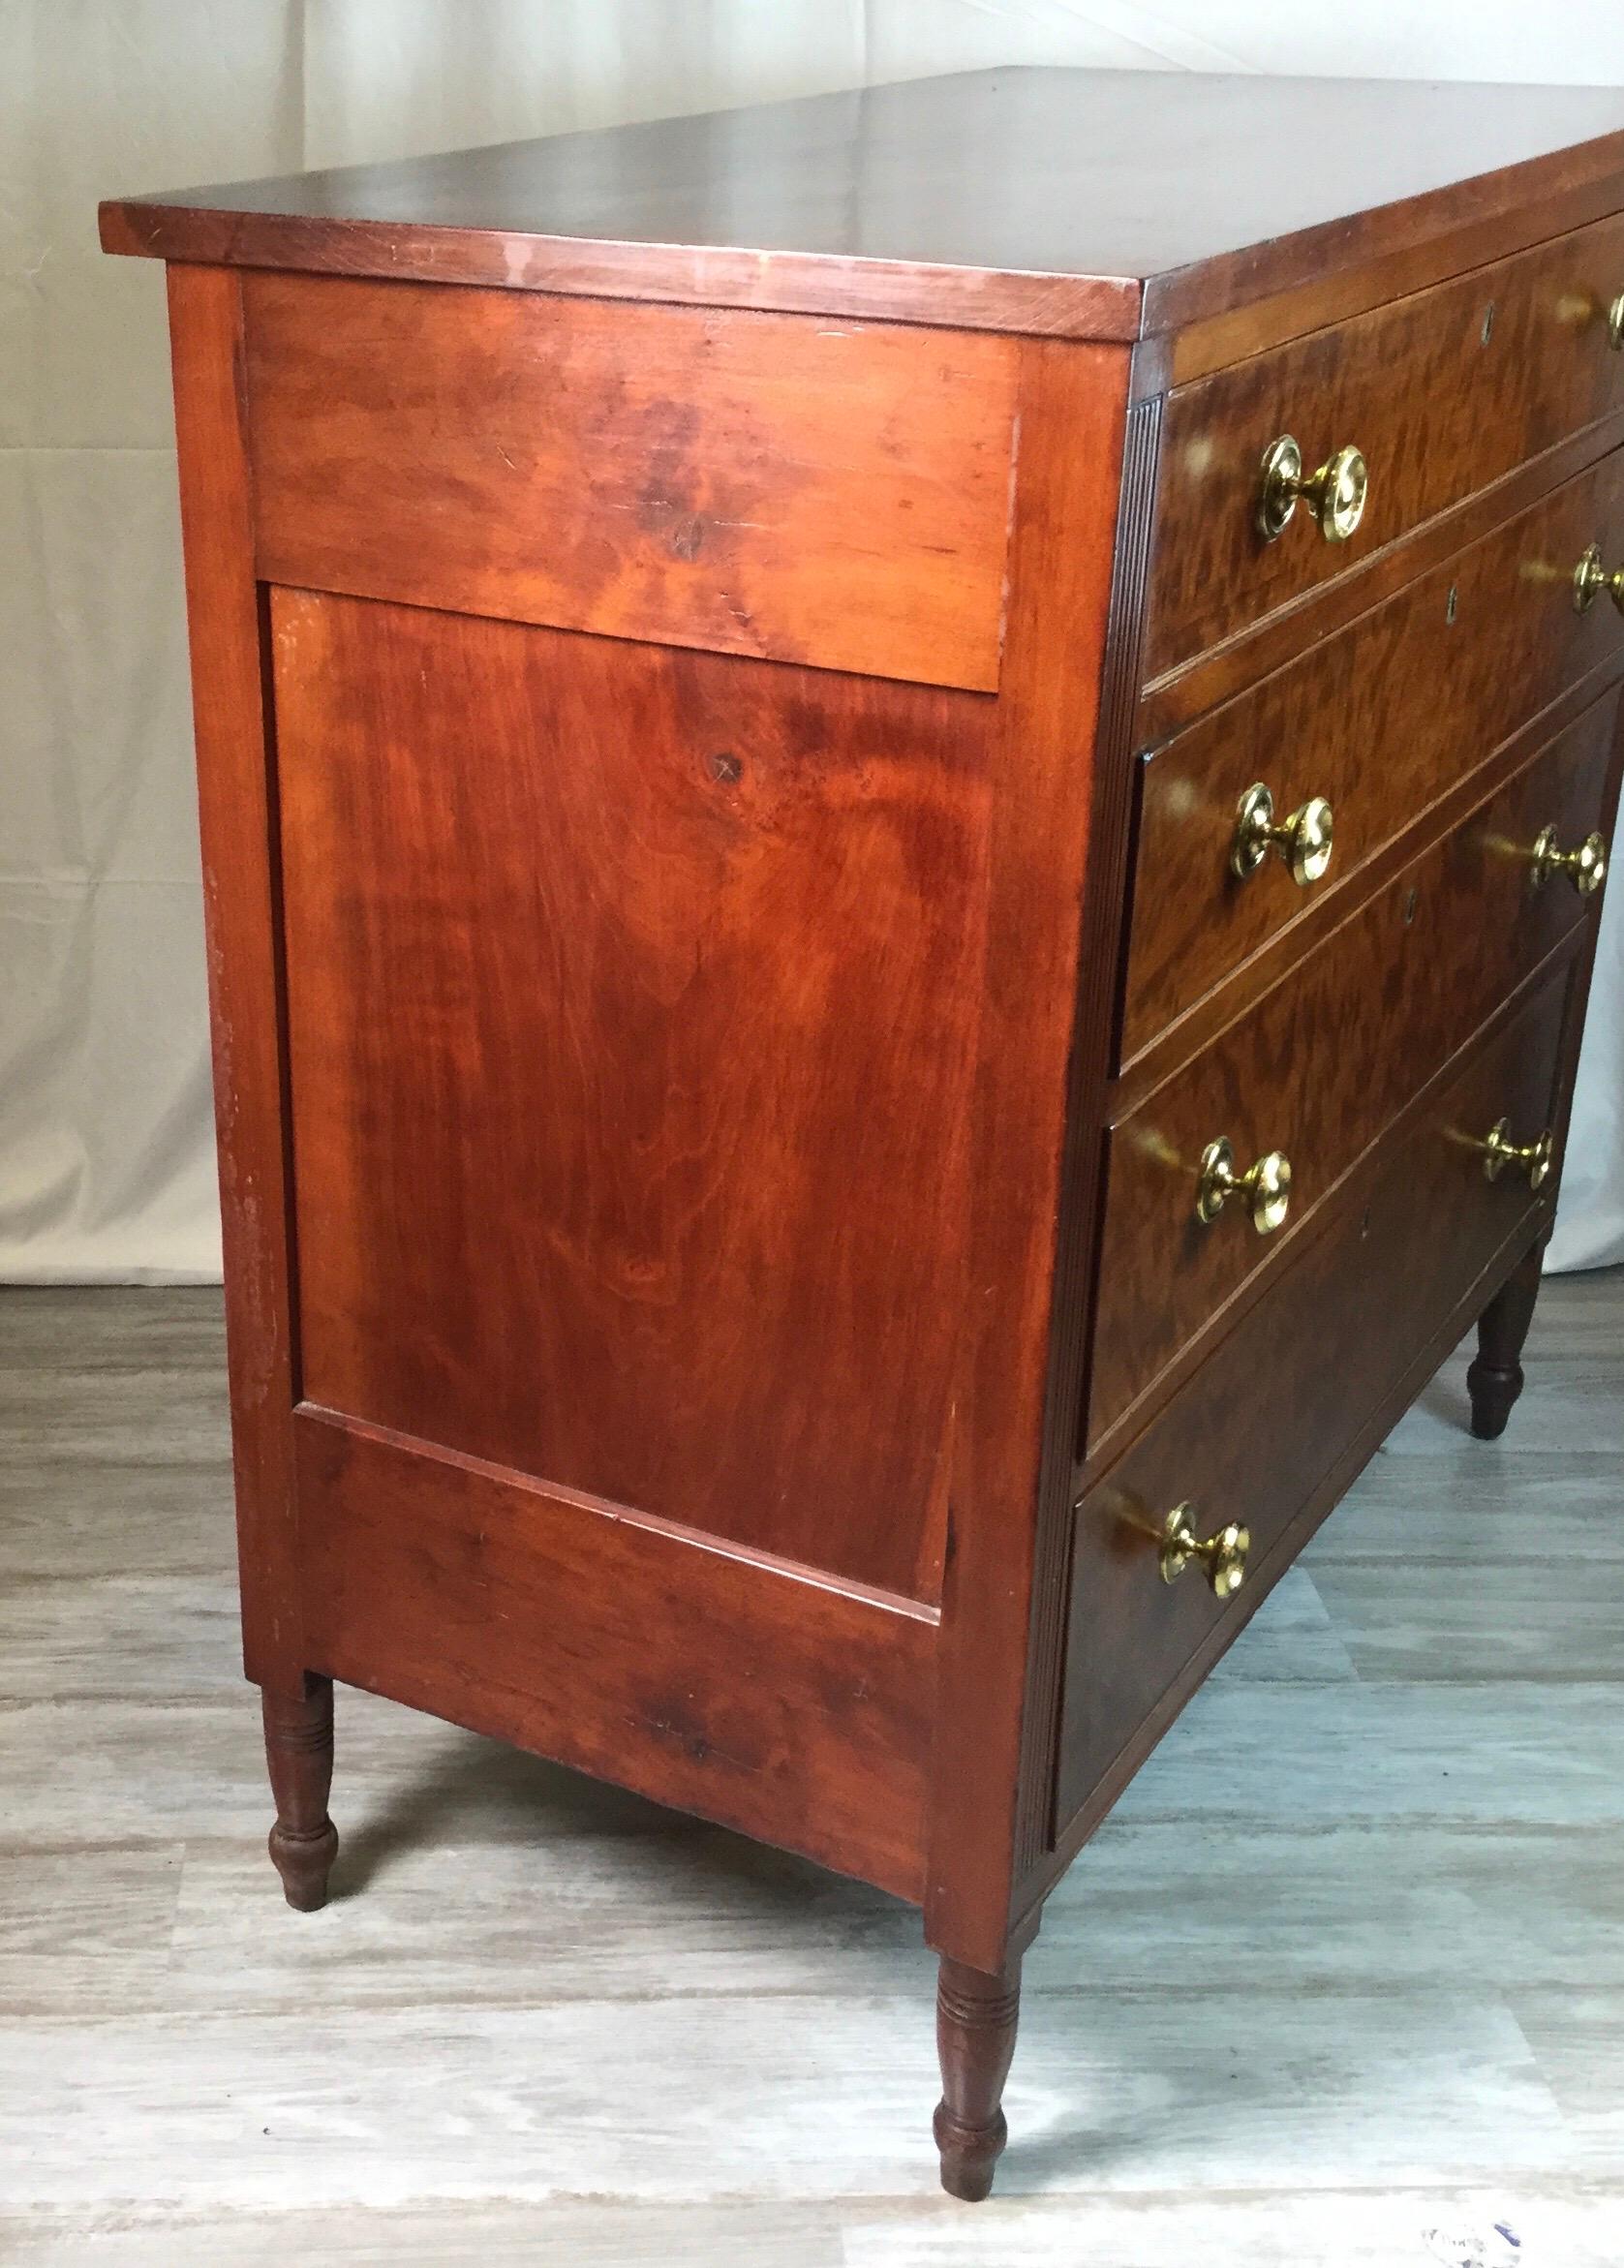 Early 19th Century American Federal Period Four-Drawer Chest